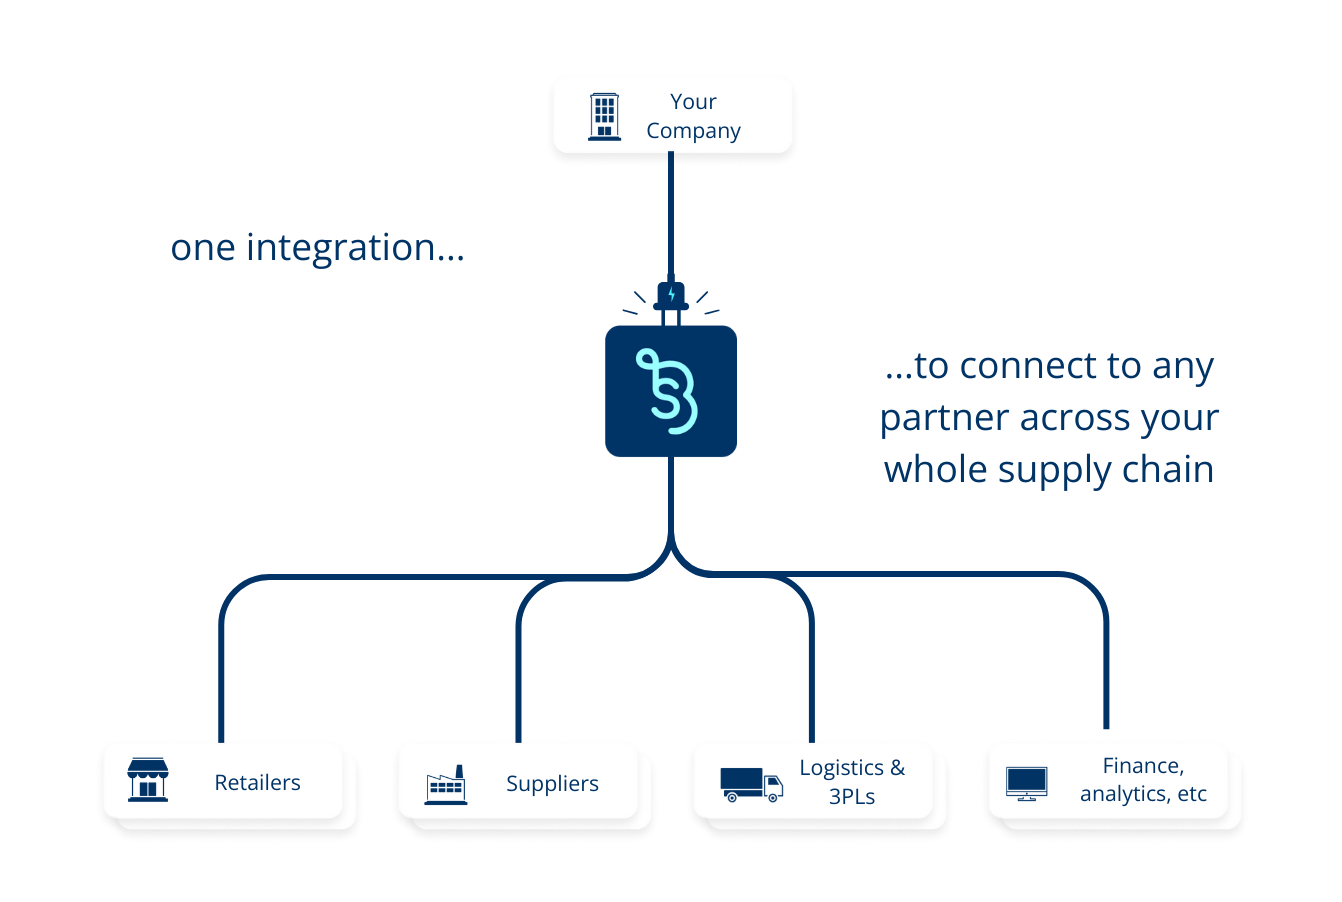 One integration to connect to any partner across your whole supply chain